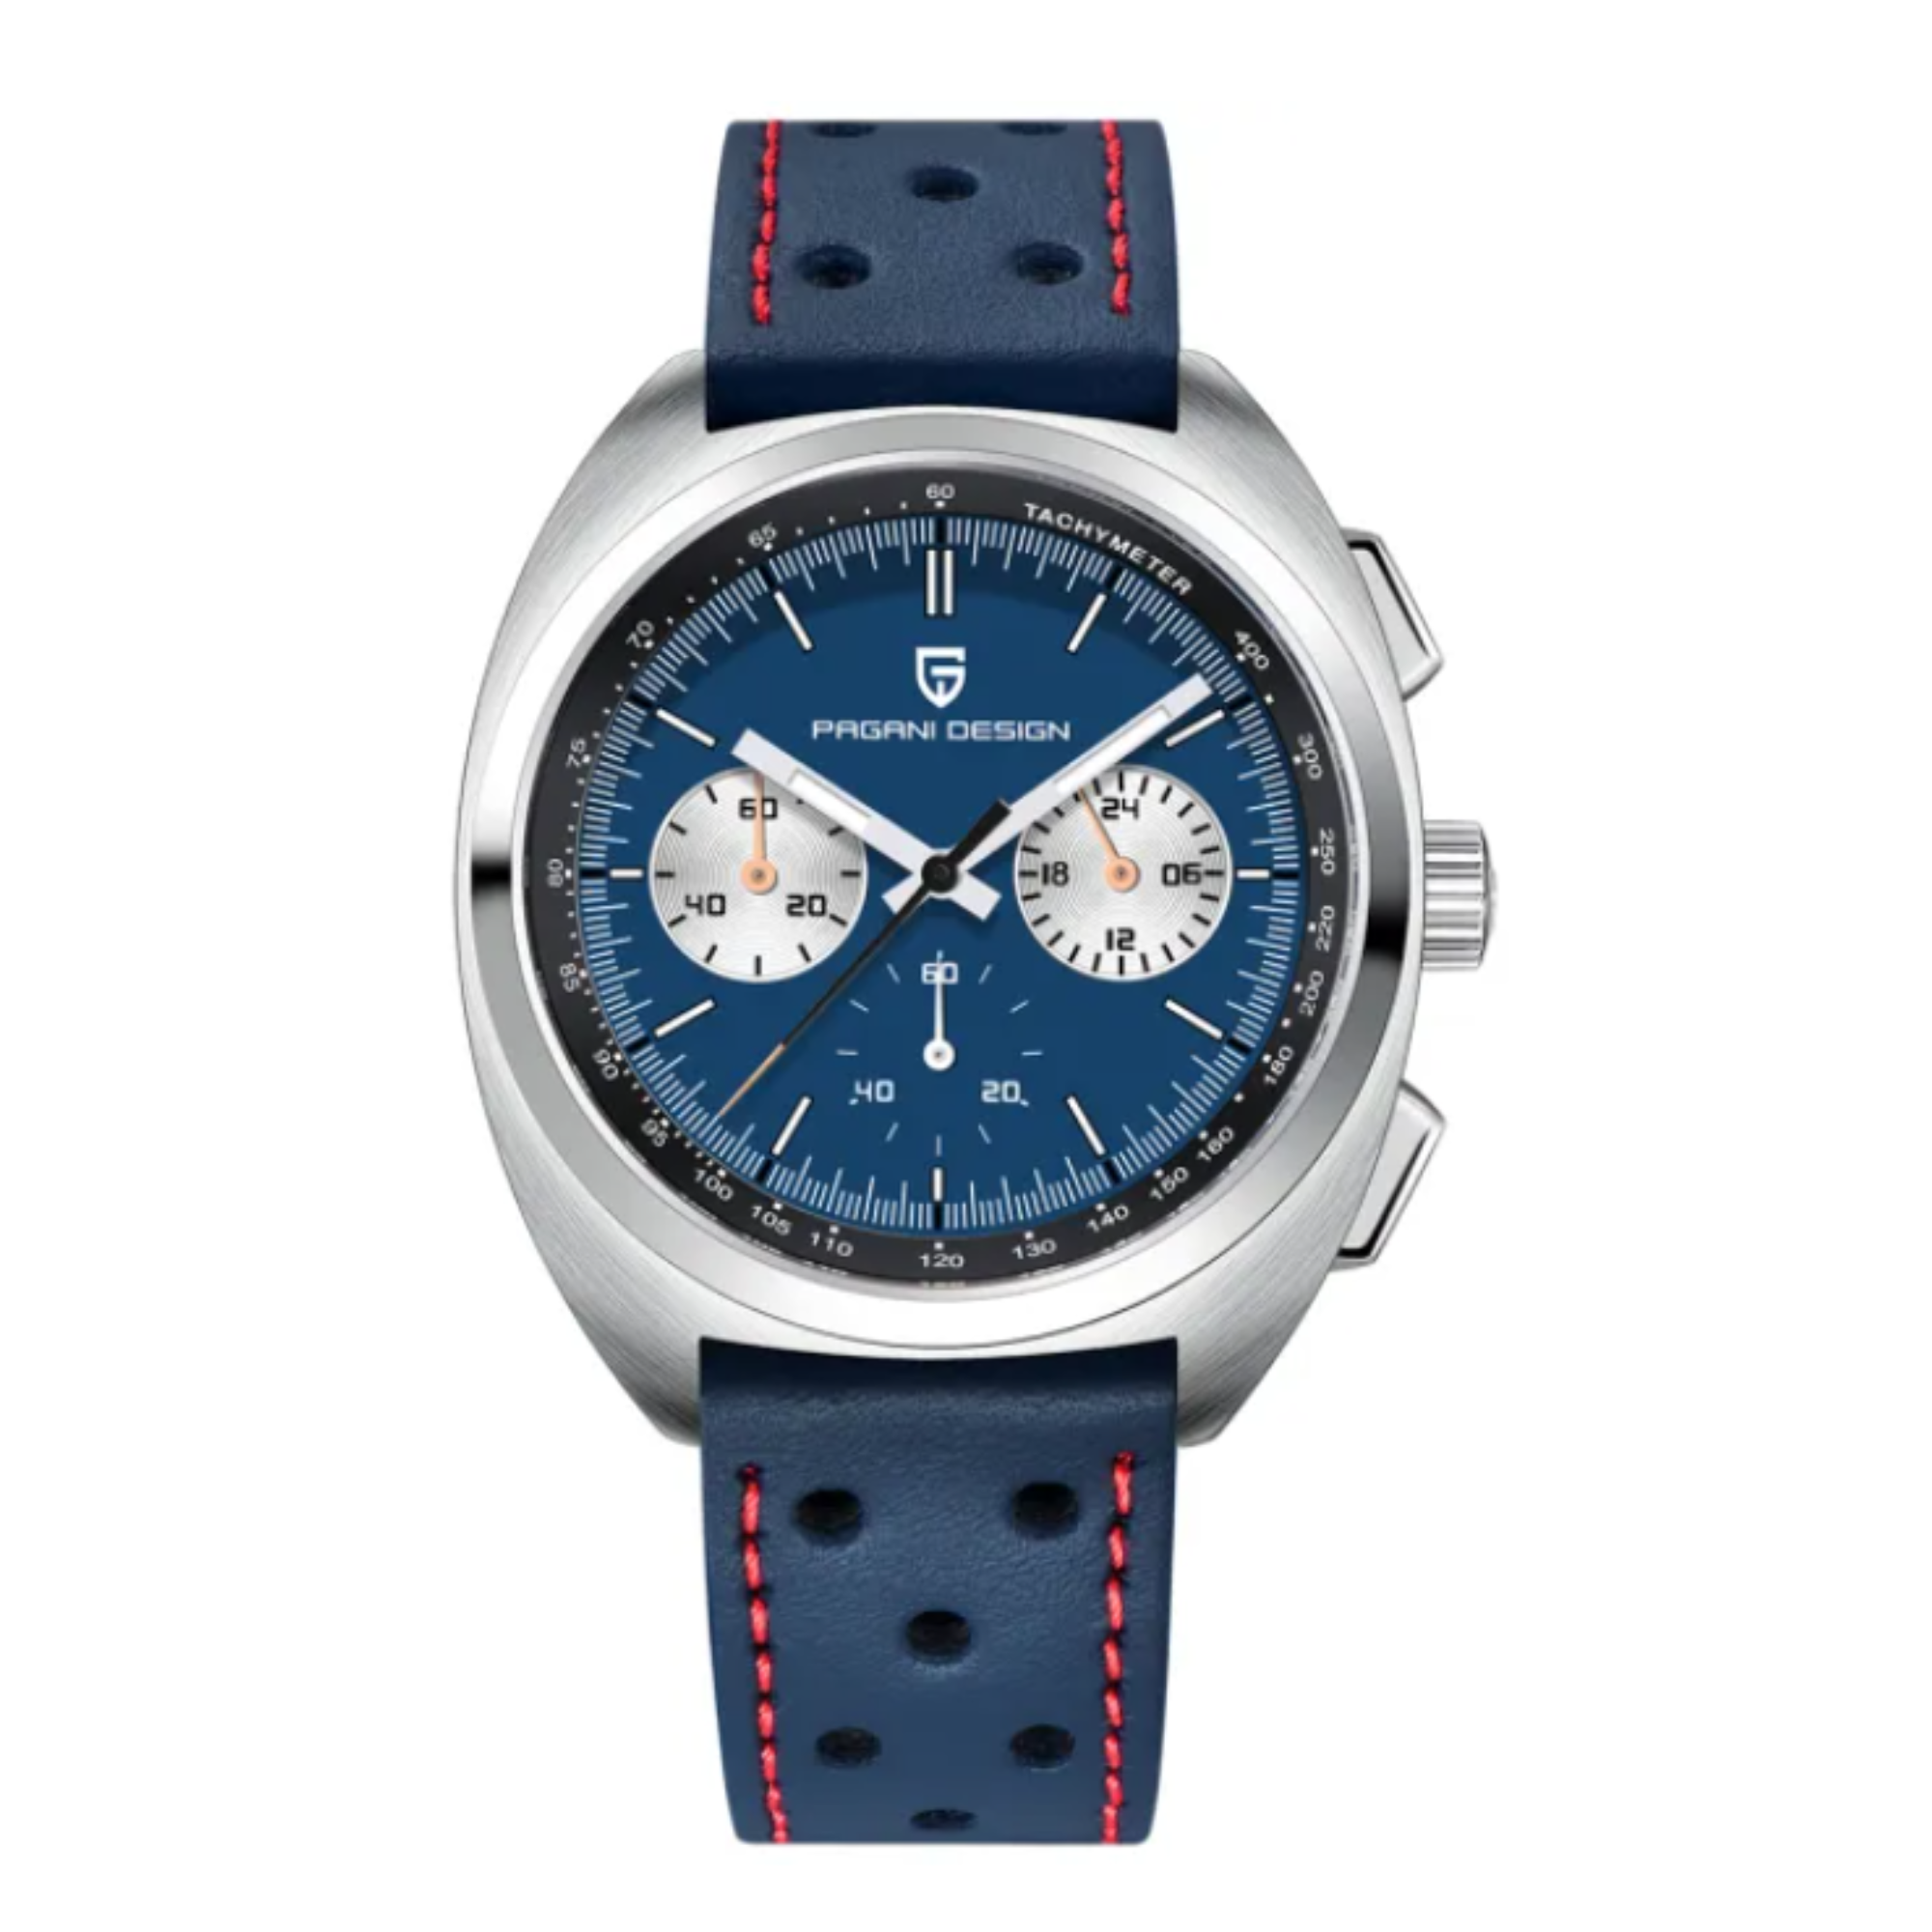 PAGANI DESIGN PD-1782 Men's Quartz Watches Chronograph Stainless Steel 40mm Sports Wrist Watch for Men - Blue Dial With Blue Leather Strap